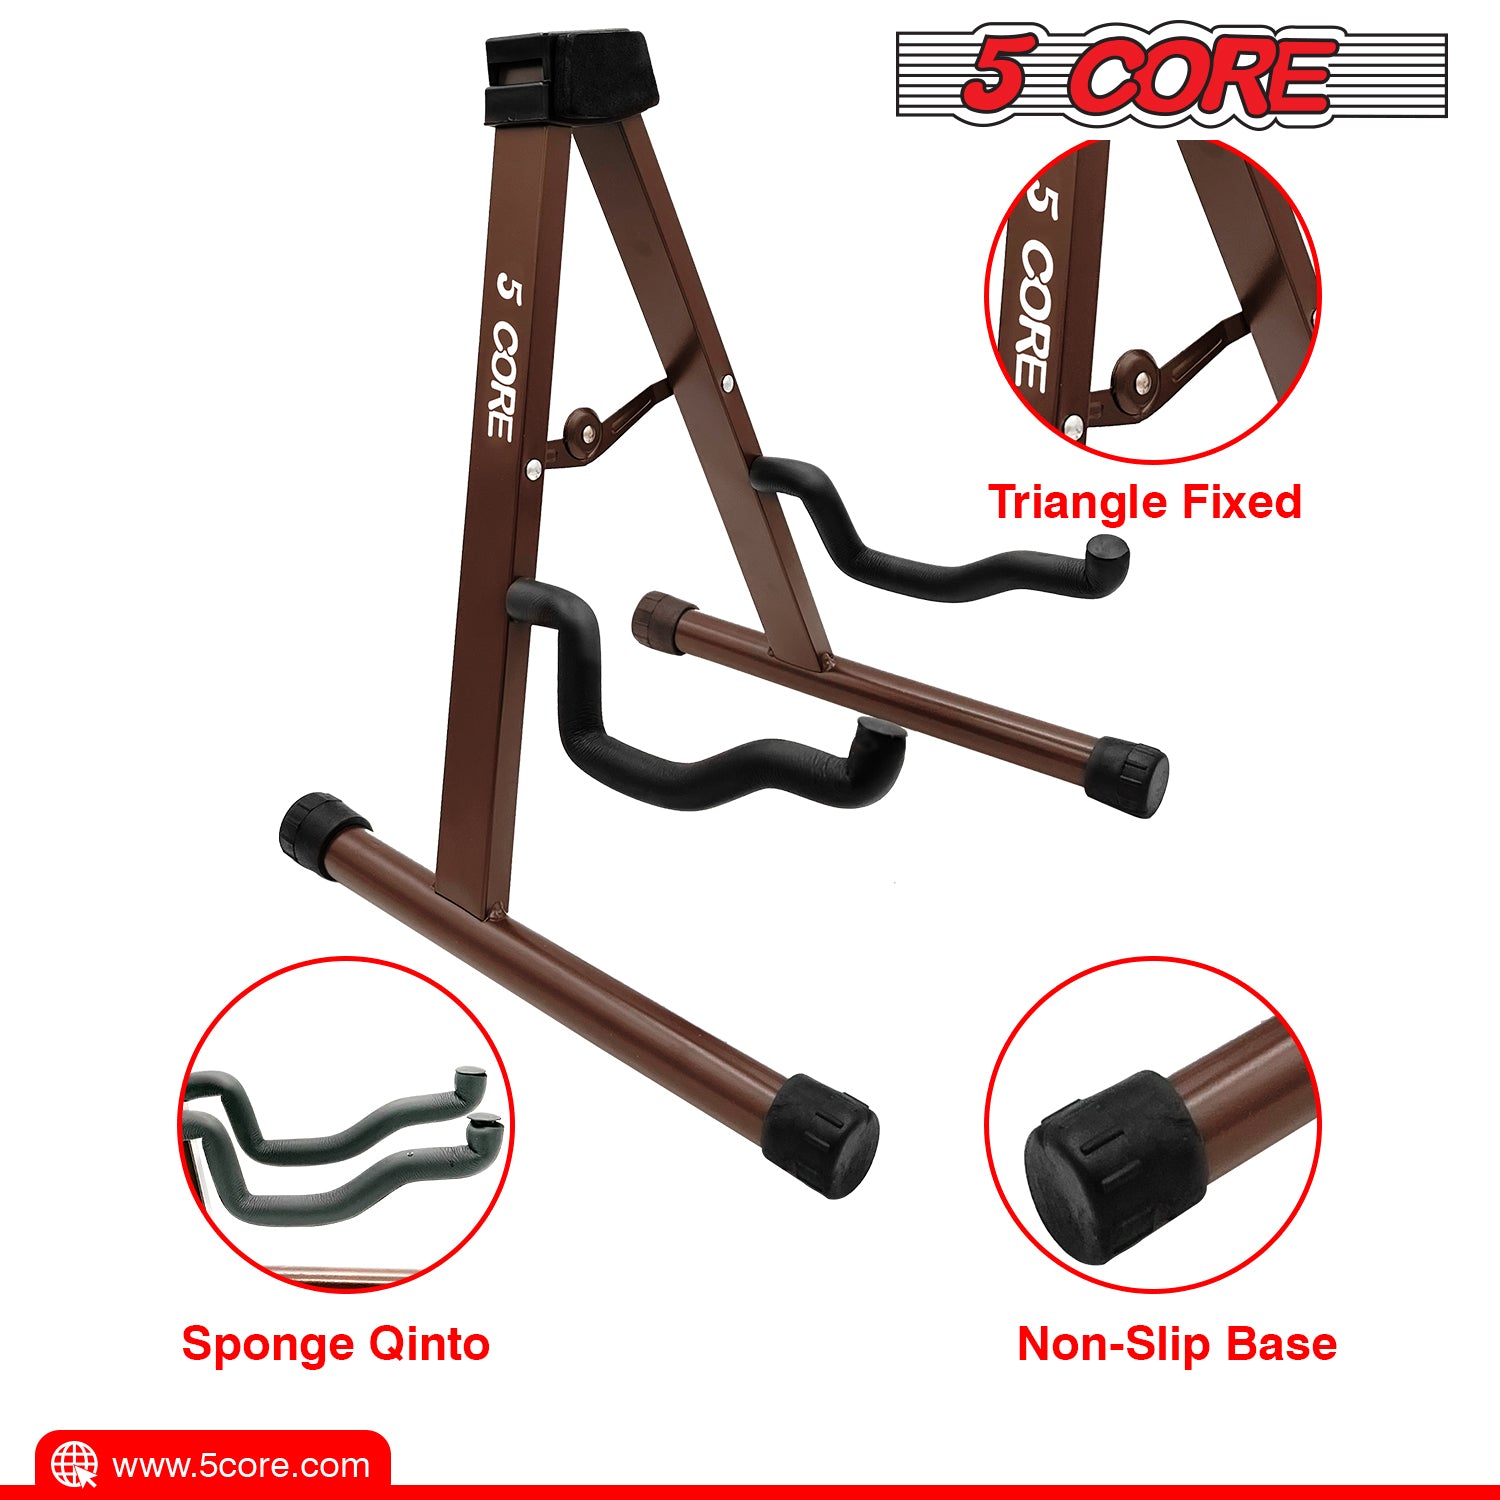 5 Core Guitar Stands Floor • Universal A-frame Folding Guitar Holder • w Secure Lock w Soft Padding